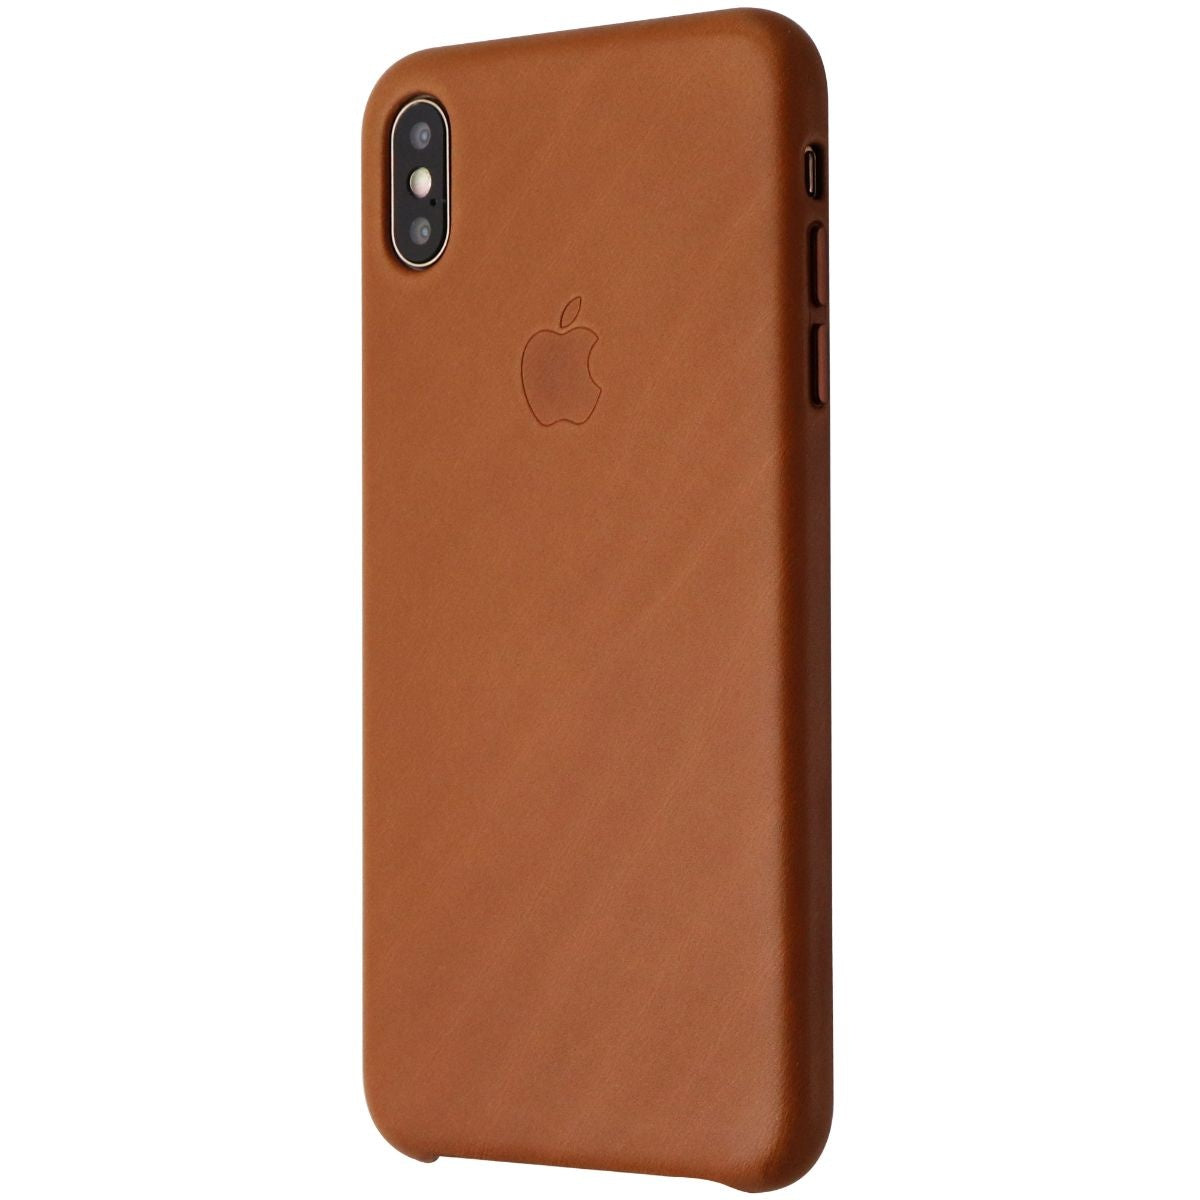 Official Apple Leather Case for Apple iPhone Xs Max - Saddle Brown (MRWV2ZM/A)